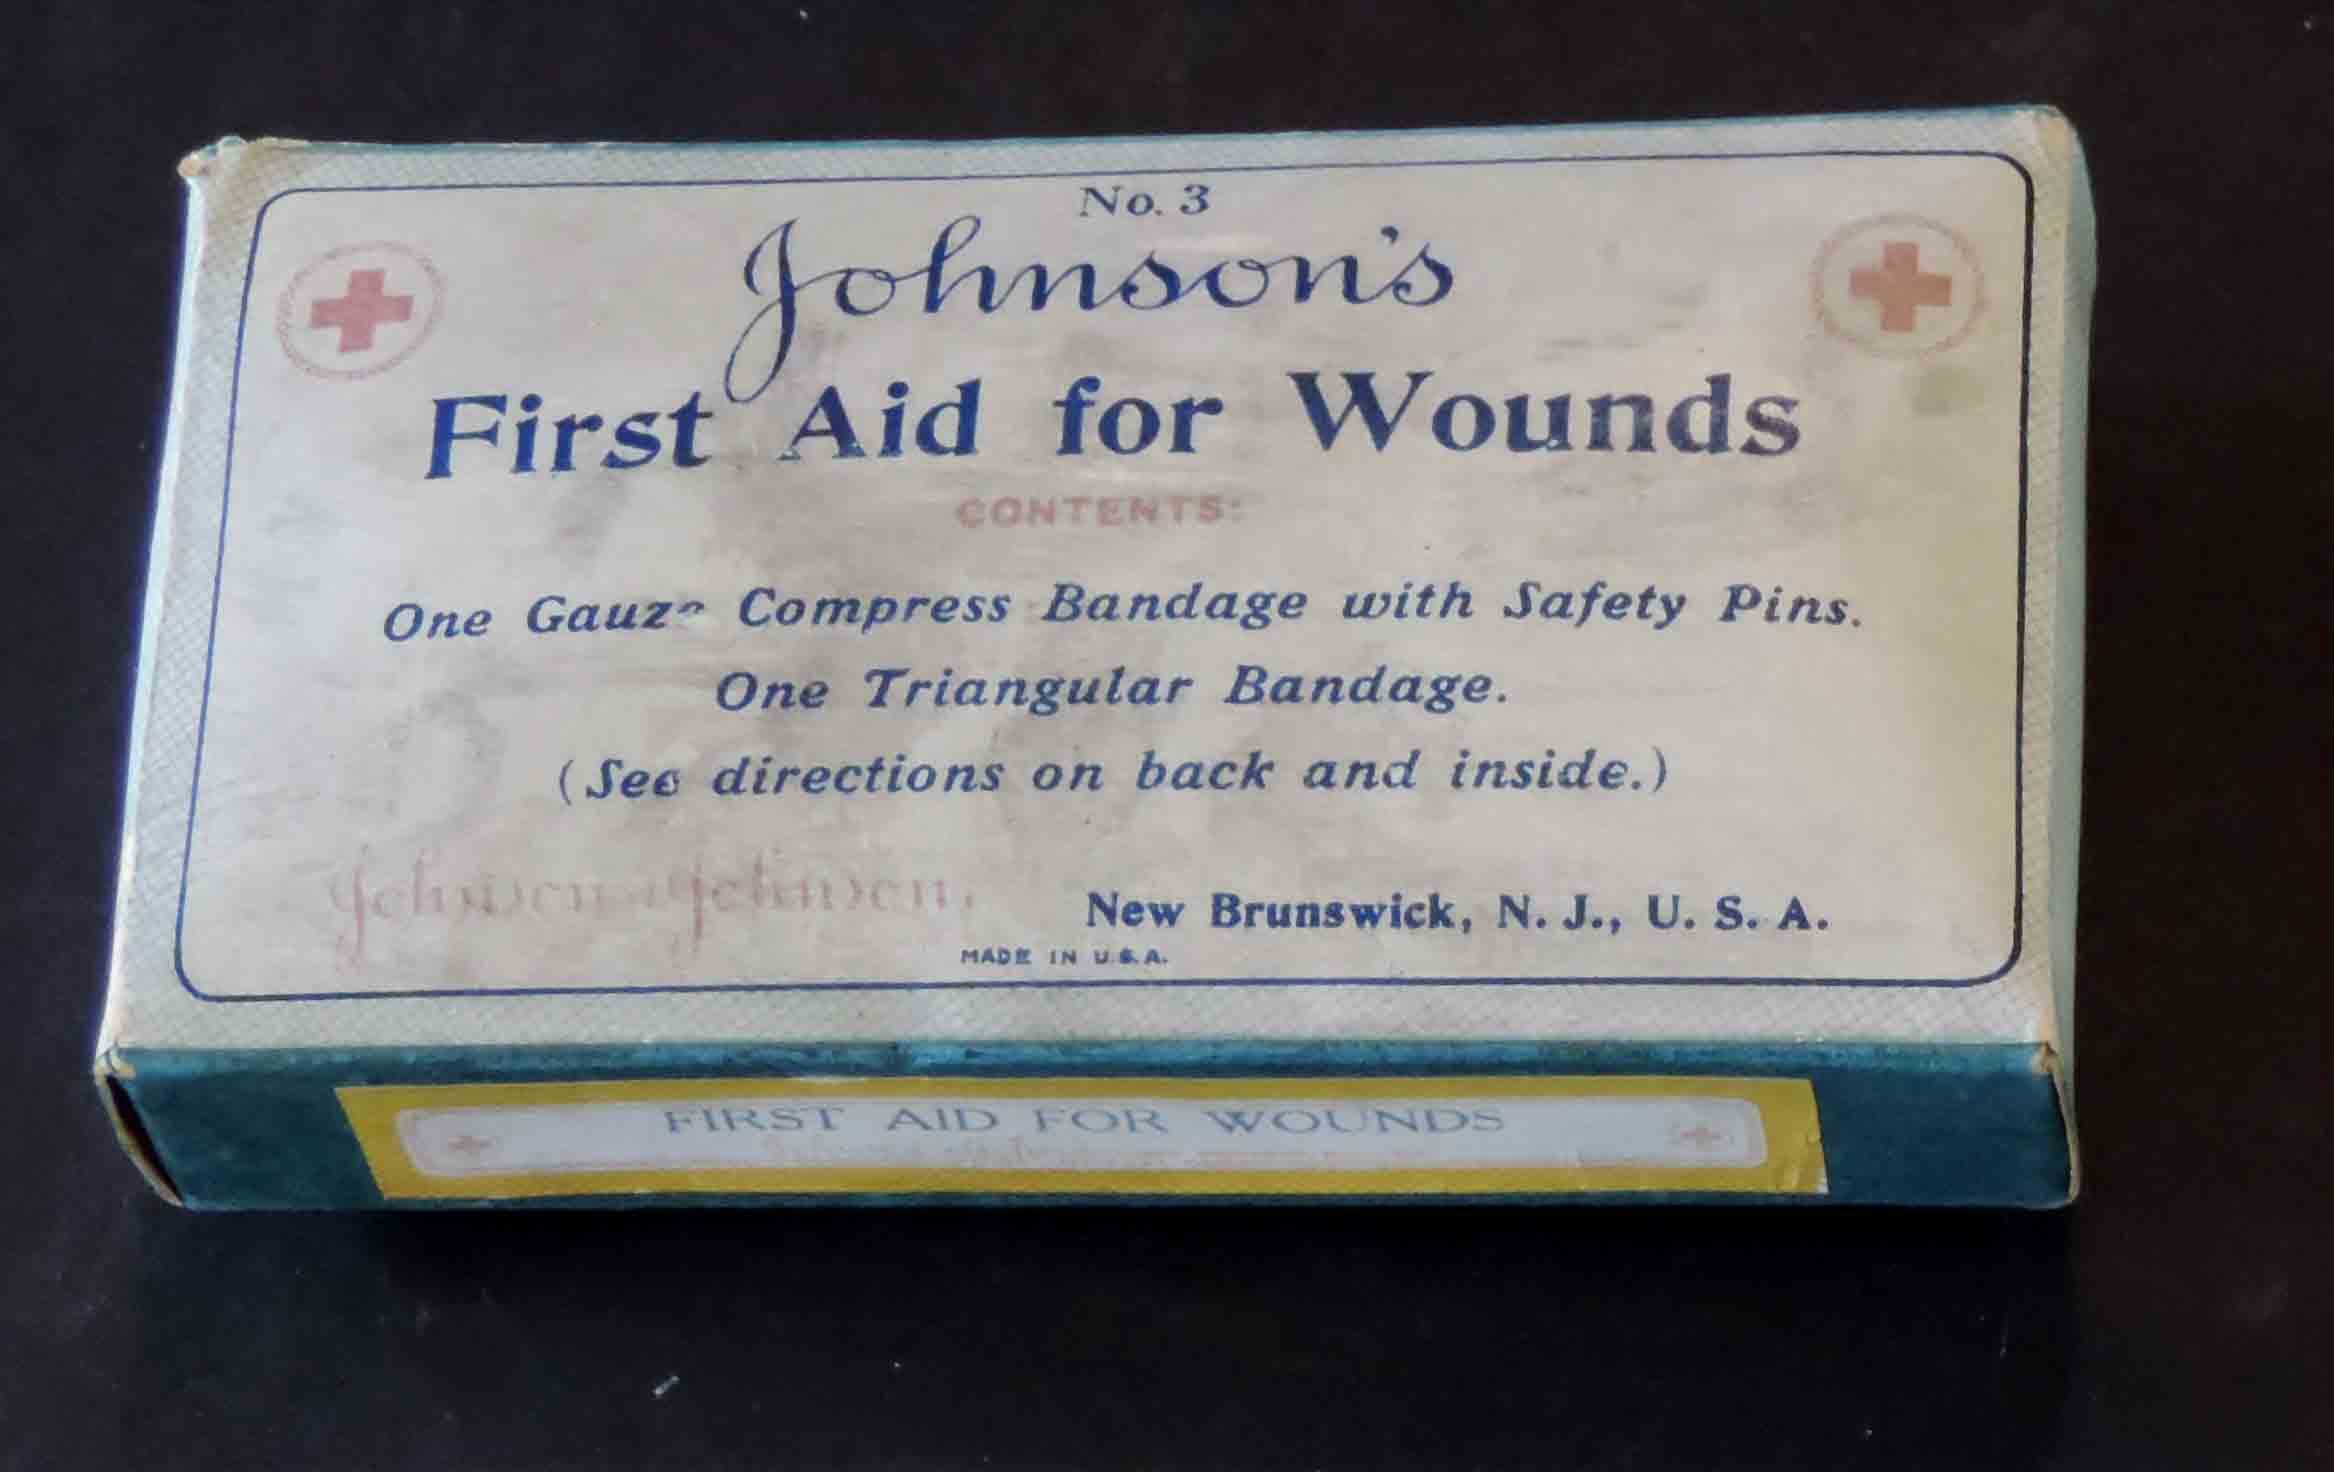 One of the Johnson & Johnson First Aid products that you can find in the National Air and Space Museum. This one’s from our archives, but you can see one at the Smithsonian as well!  Image: Johnson & Johnson Archives.